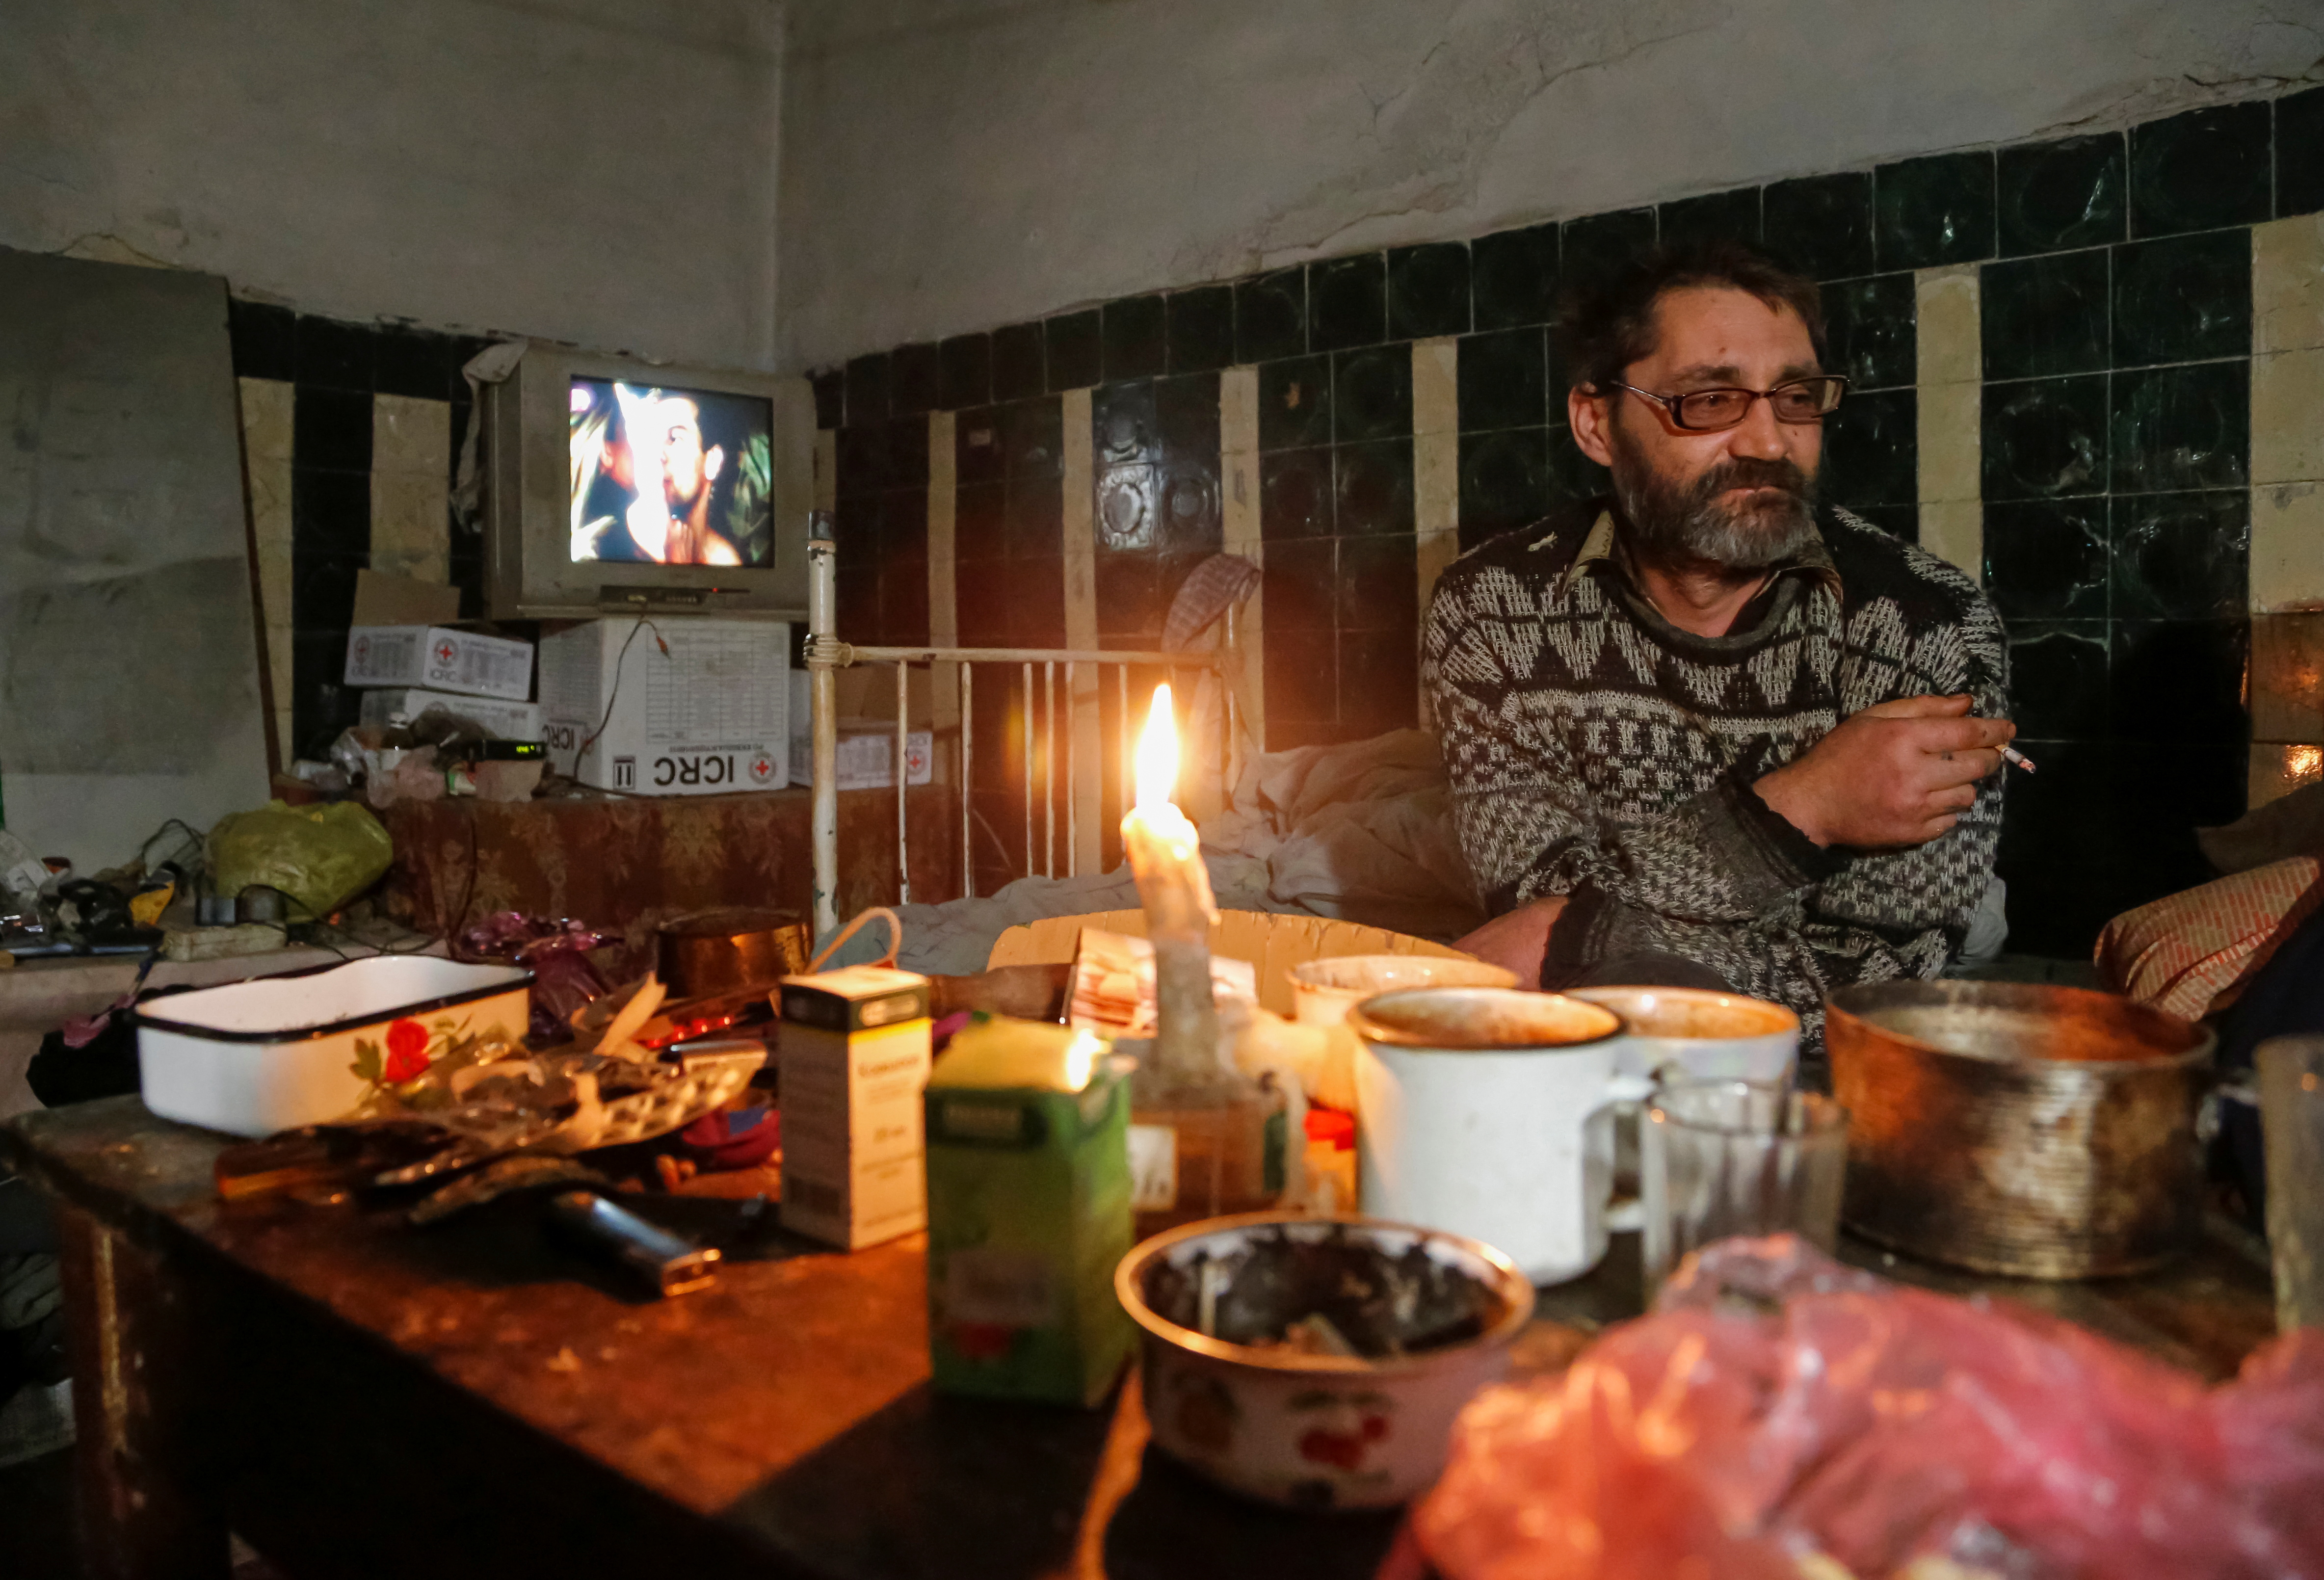 Local resident Alexander Studenikin, 44, smokes in a basement of a school building where he lives after his house was damaged by shelling, in the rebel-controlled town of Horlivka (Gorlovka) near Donetsk, Ukraine, November 24, 2021. Picture taken November 24, 2021.  REUTERS/Alexander Ermochenko